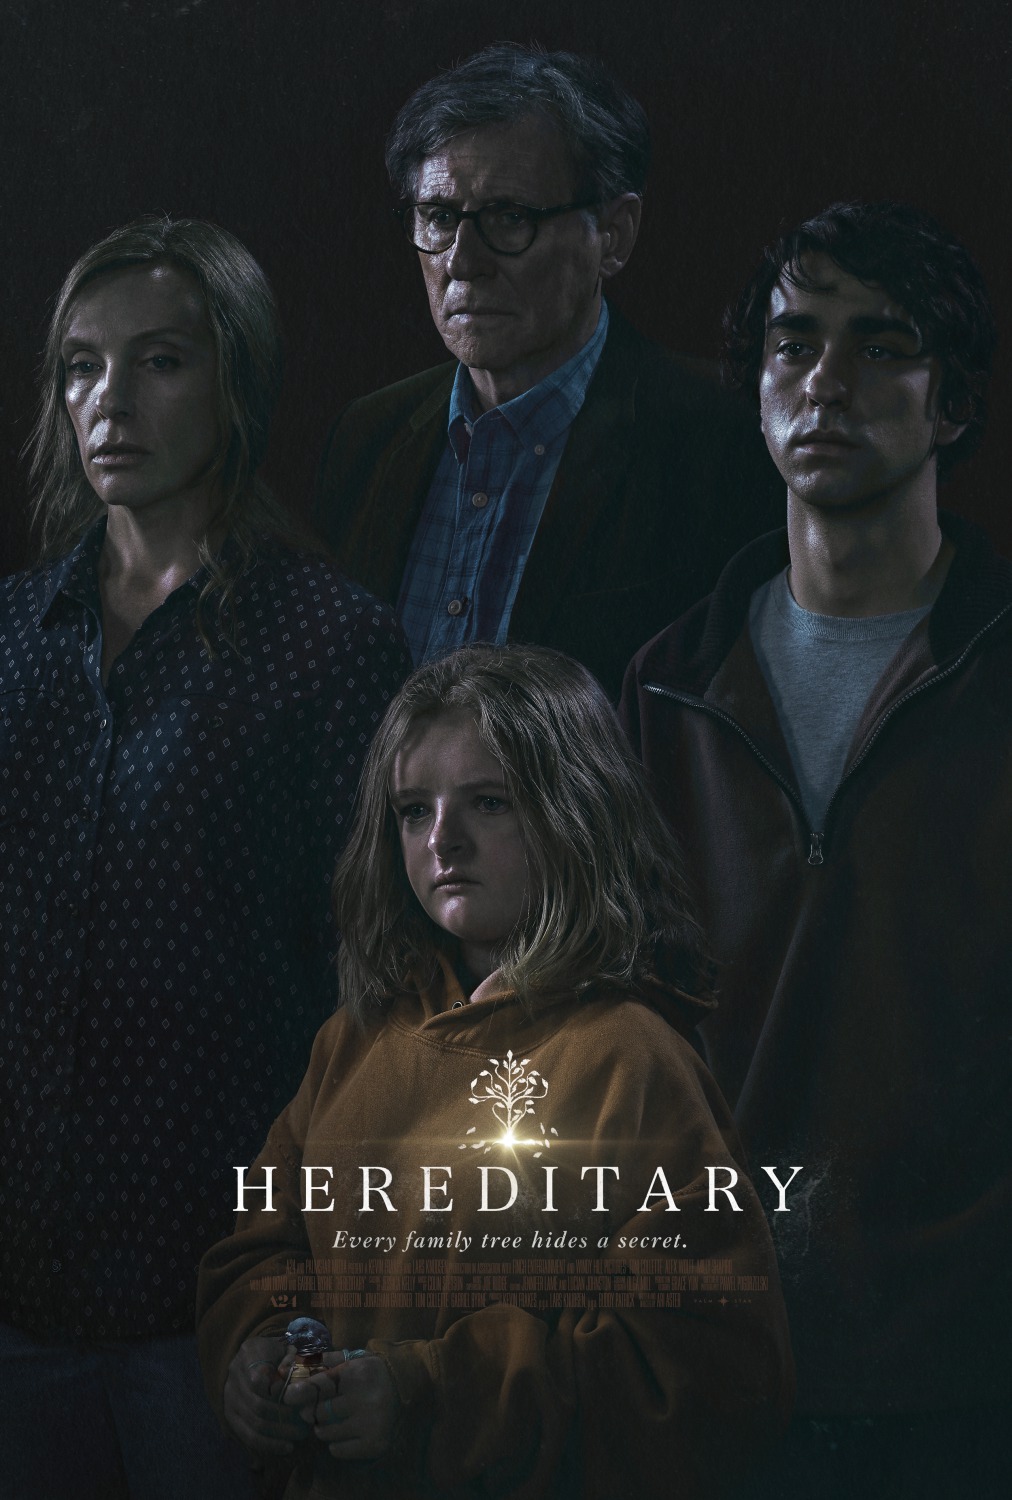 Hereditary film review: Toni Collette stuns in terrifying and deeply upsetting horror